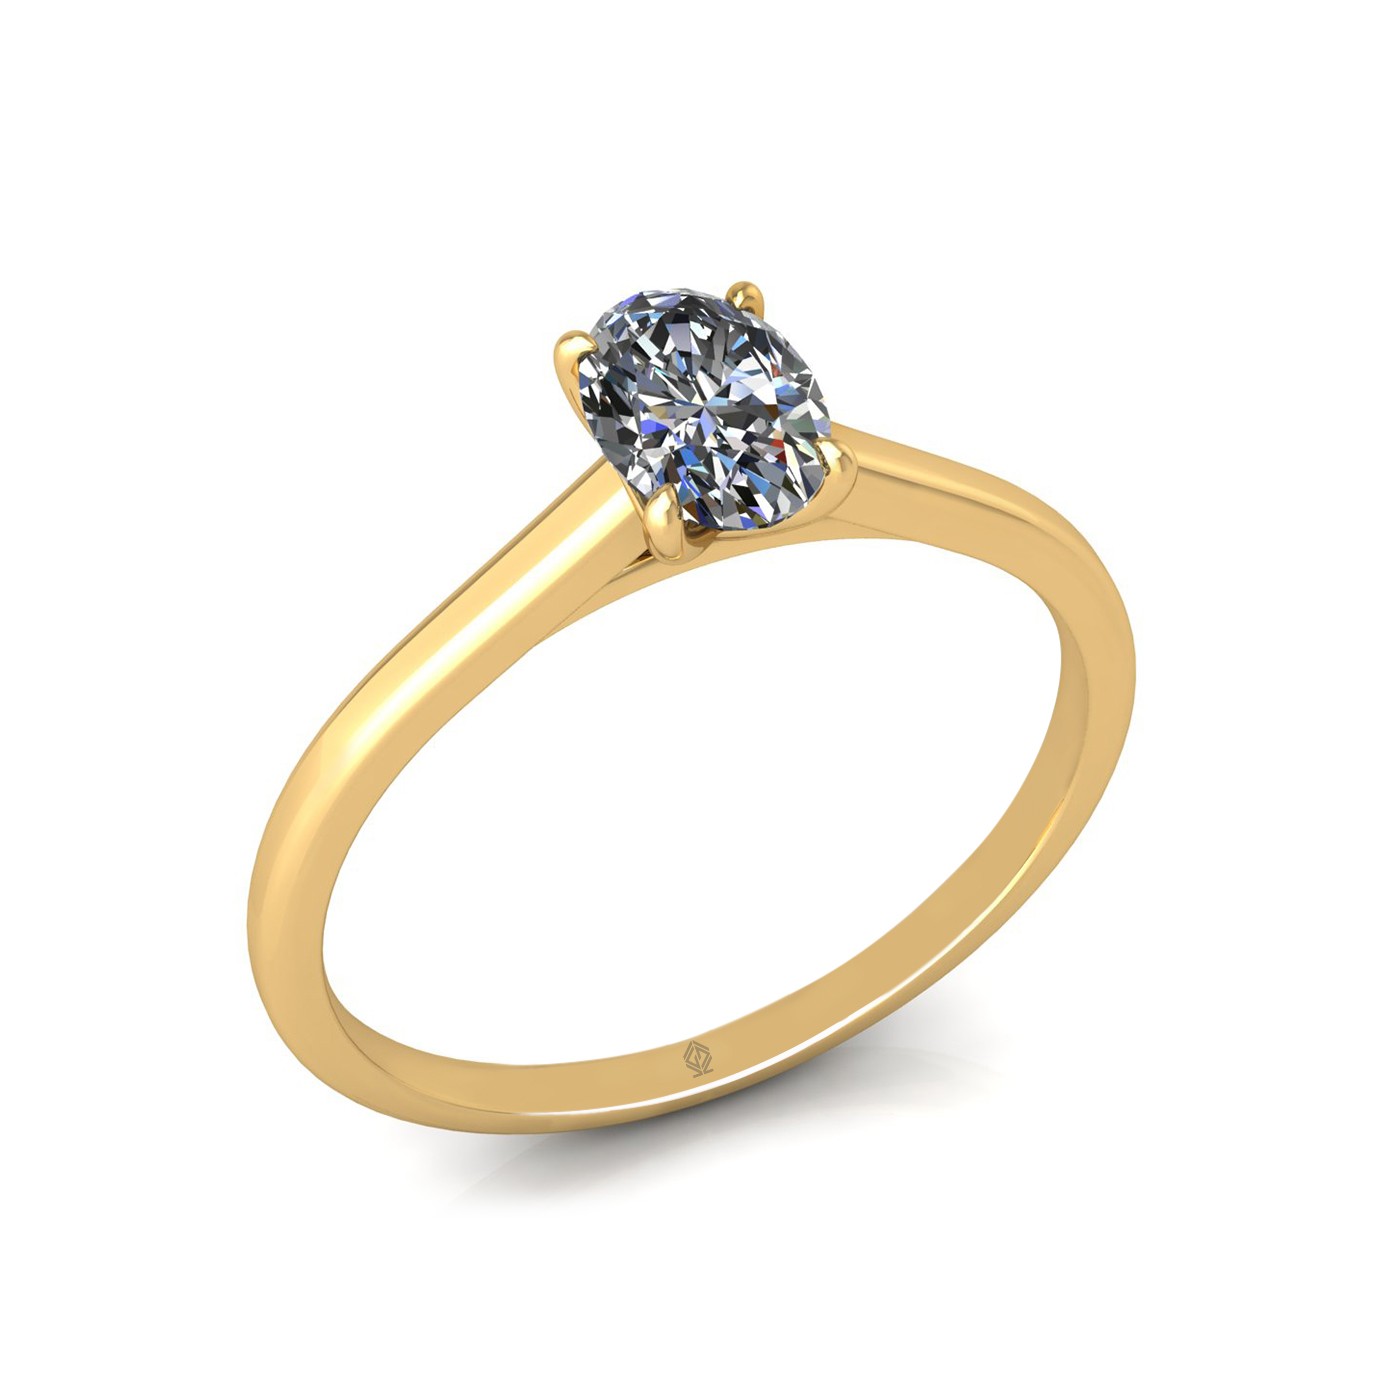 18k yellow gold  0,50 ct 4 prongs solitaire oval cut diamond engagement ring with whisper thin band